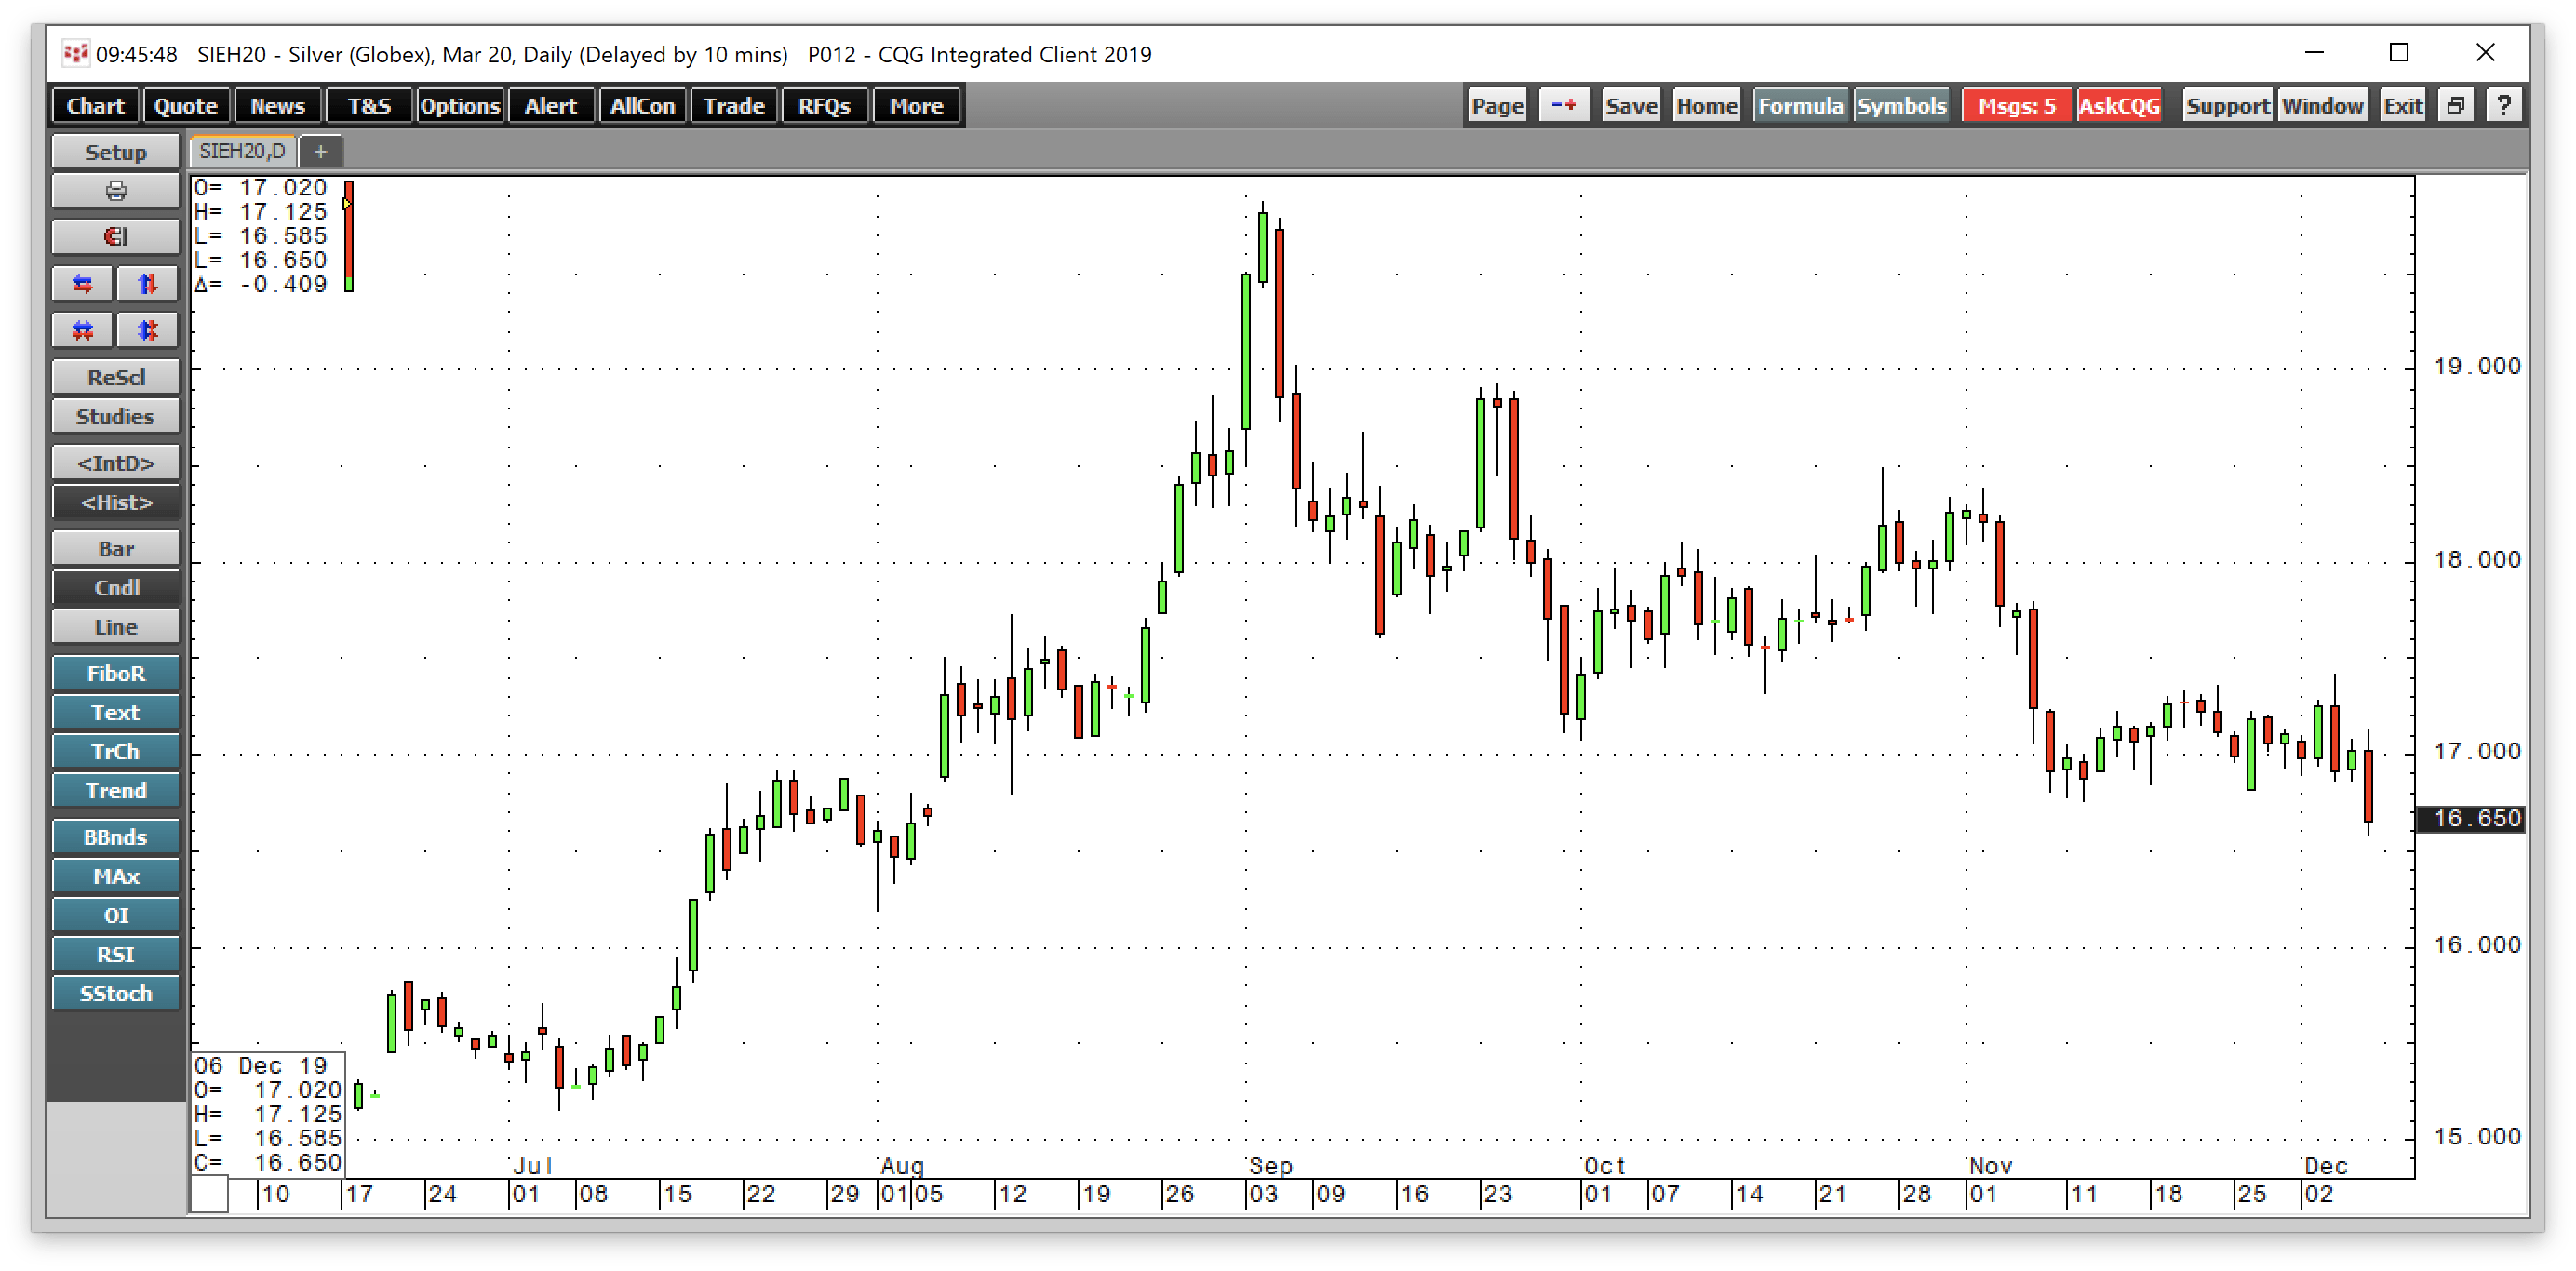 6 Month Silver Chart